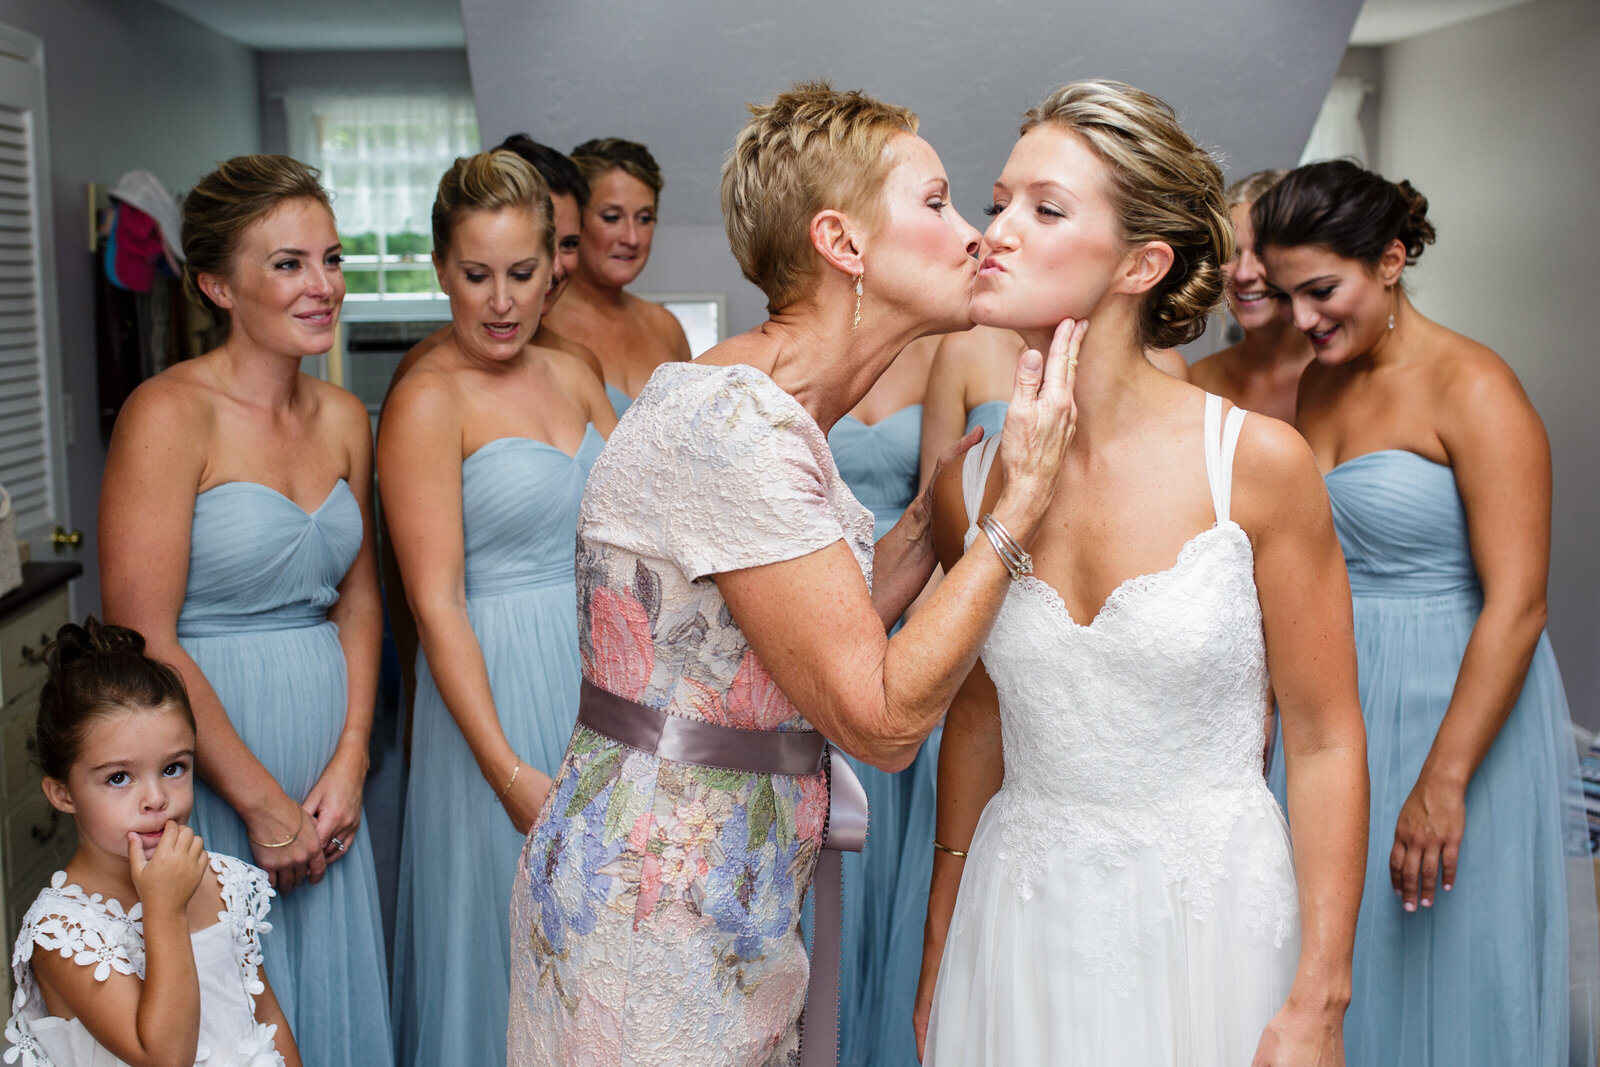 mother ob bride kisses daughter on the cheek